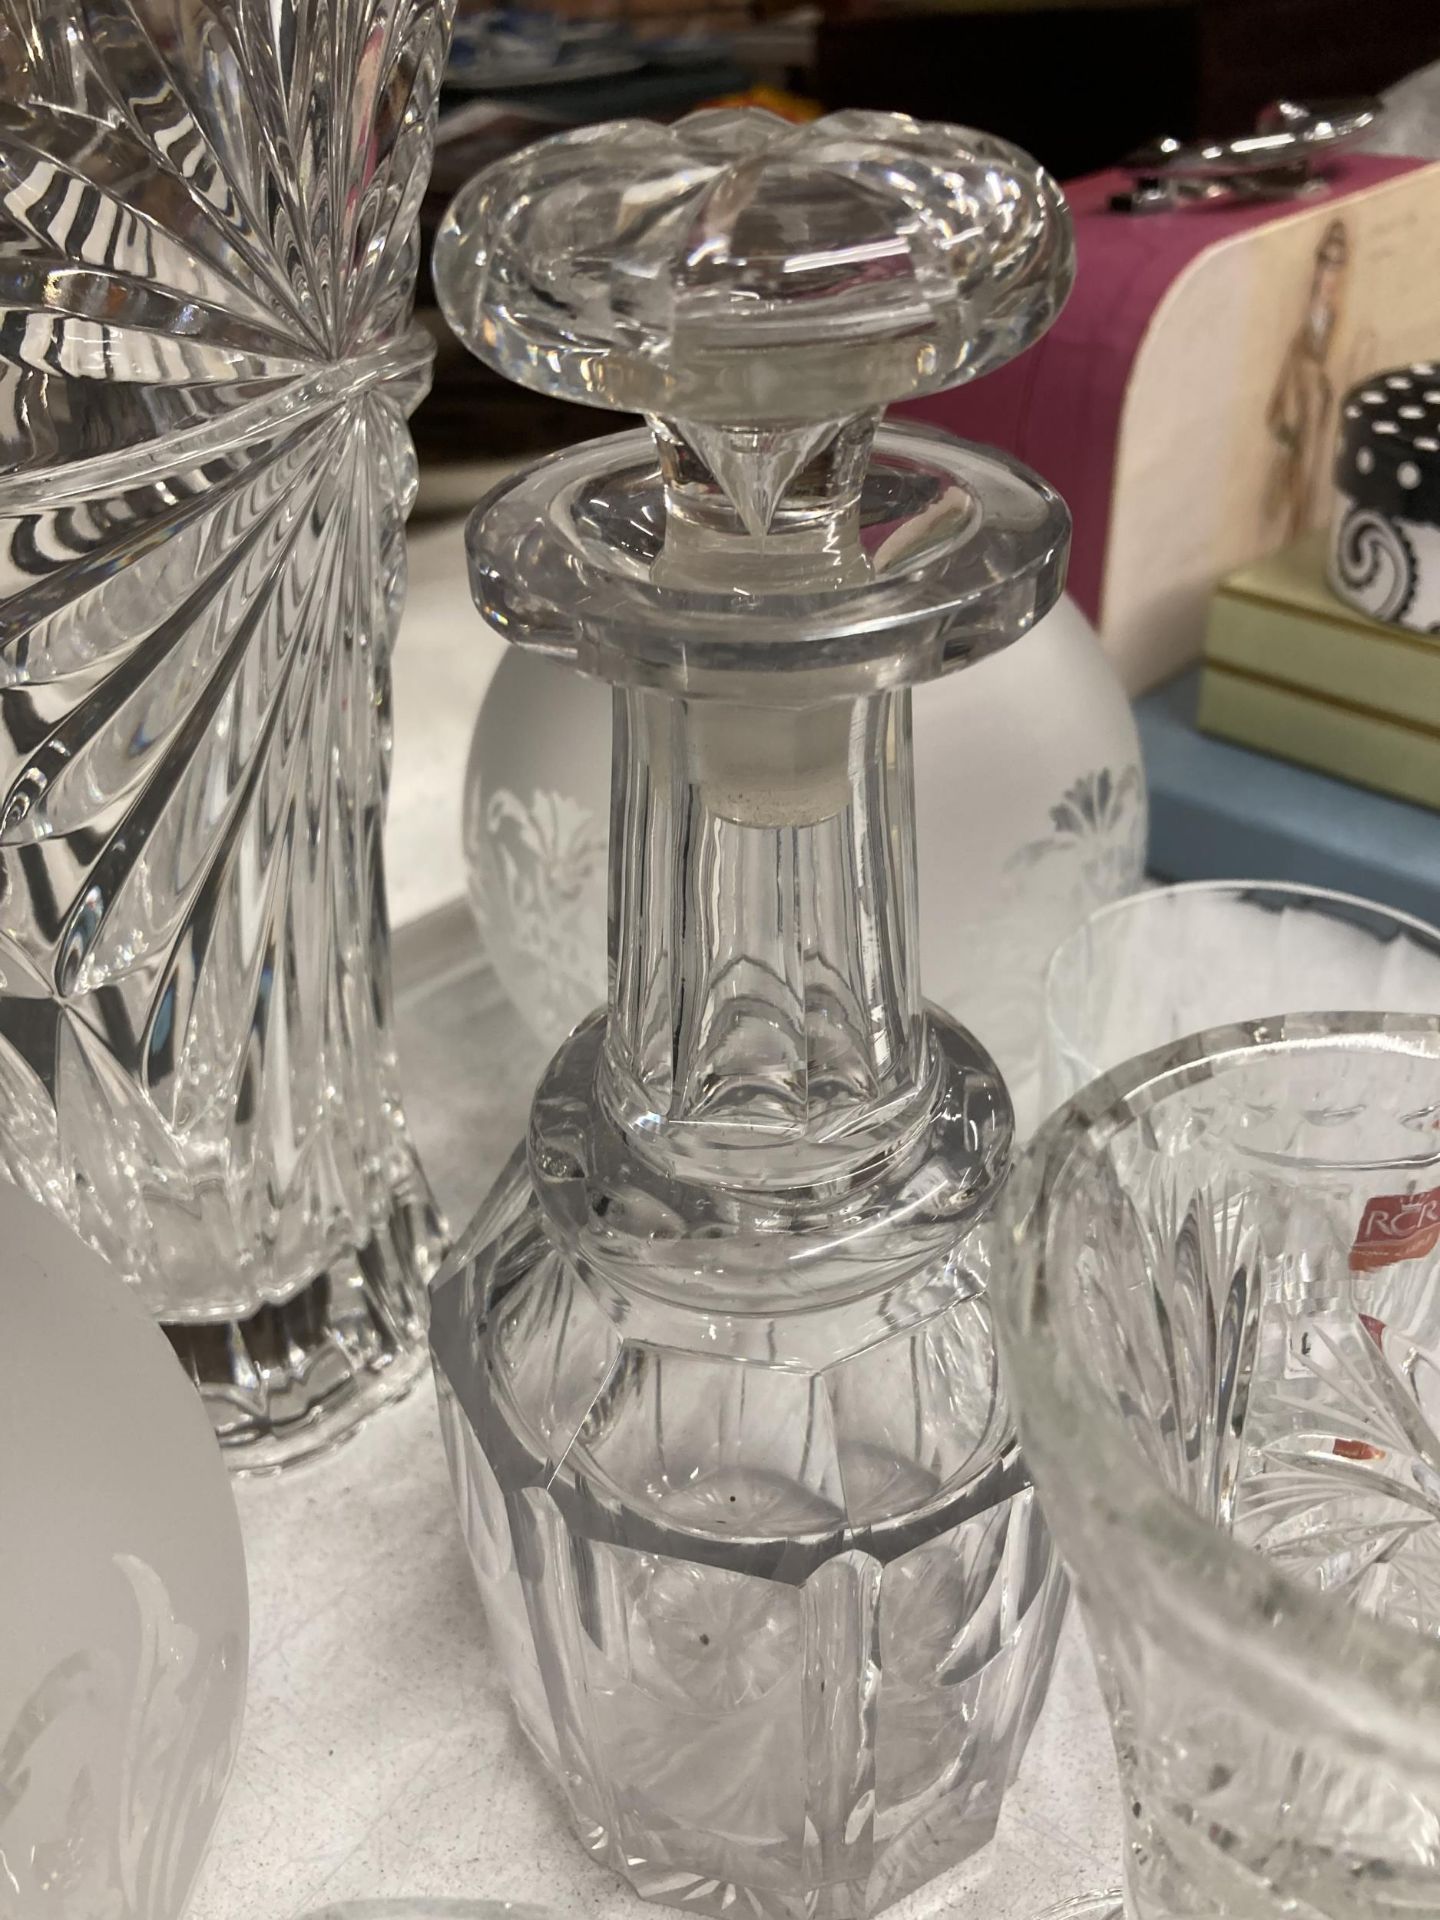 A PAIR OF VINTAGE OIL LAMP SHADES, A HEAVY CUT GLASS SHADE, DECANTER, GLASSES, ETC - Image 3 of 4